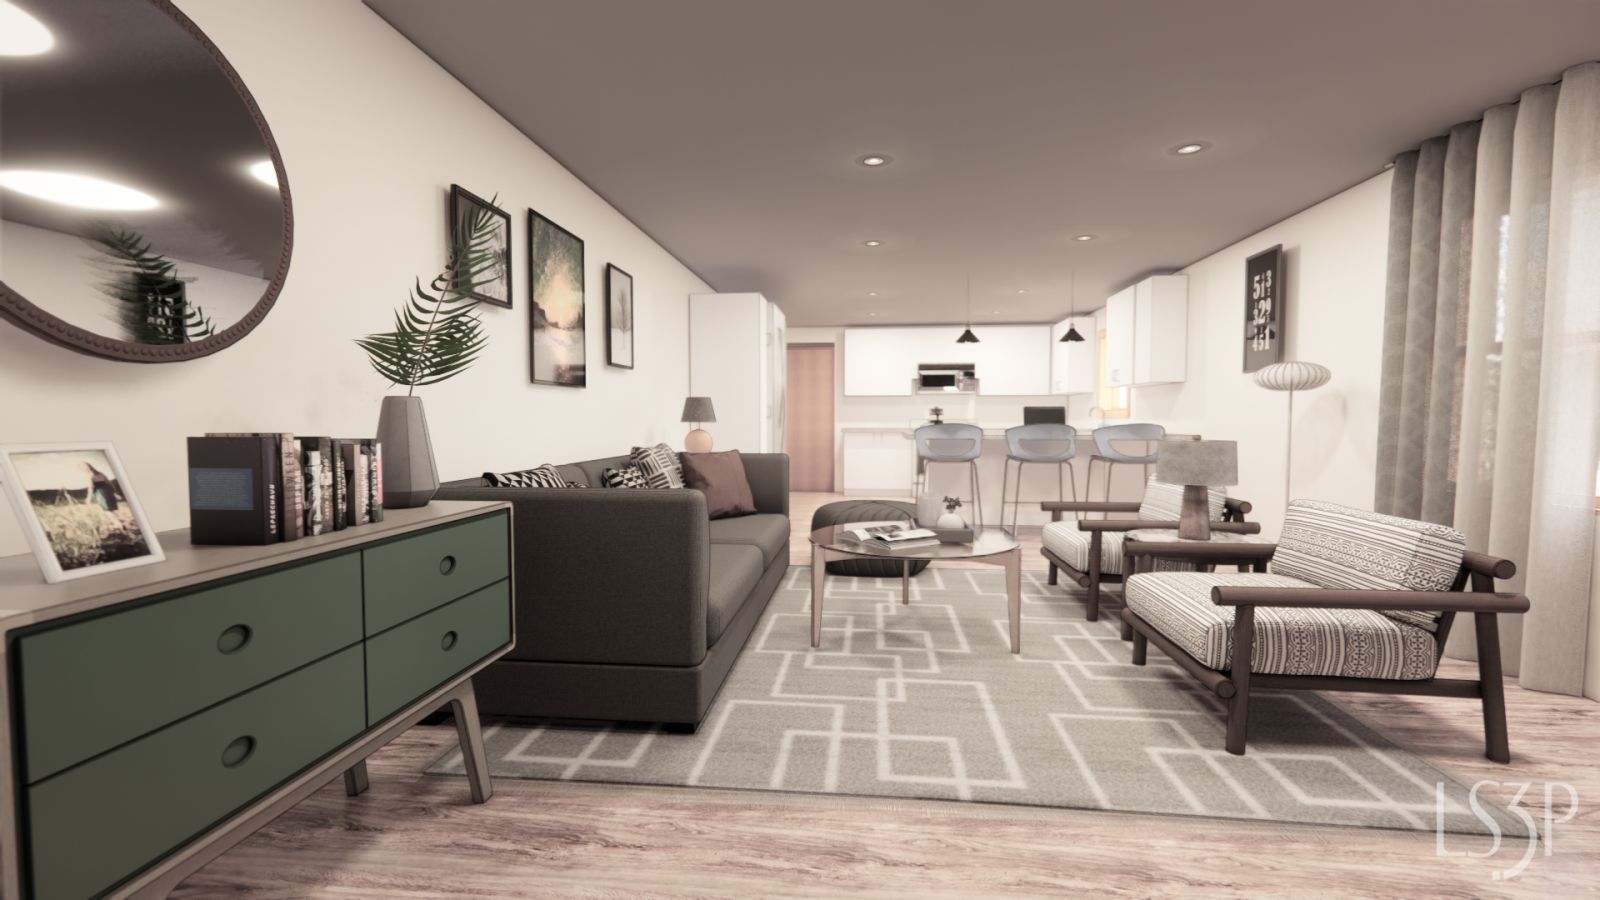 LS3P contributed interior design renderings for the home. (Photo/Provided)